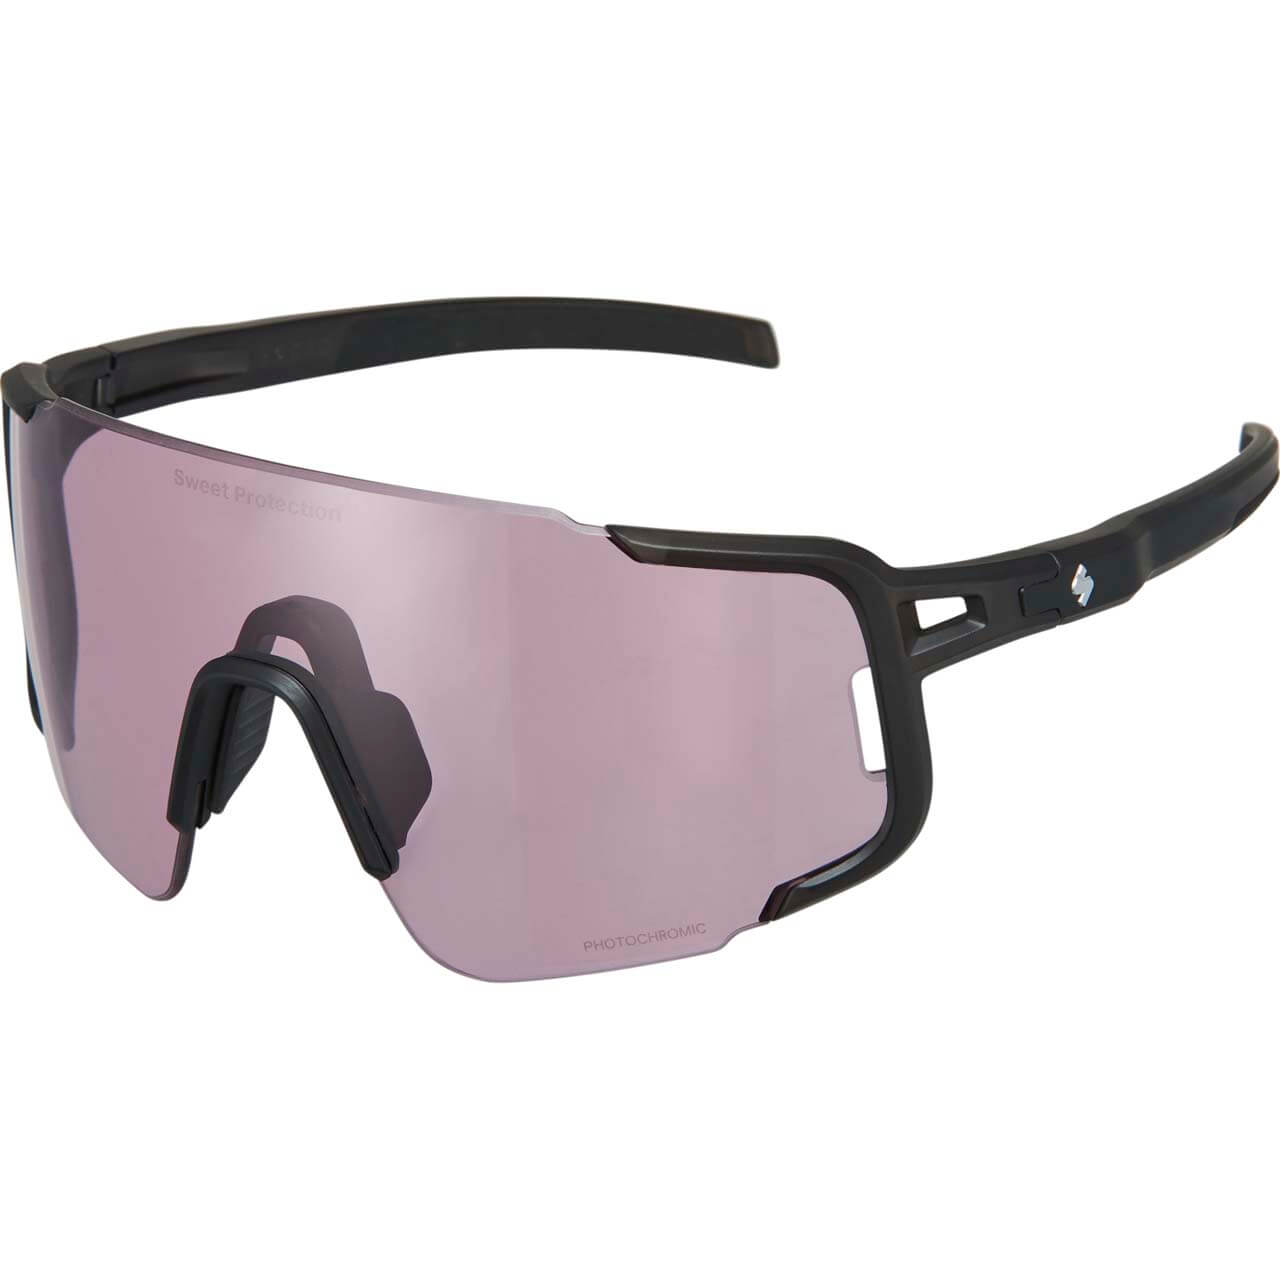 Sweet Ronin Max Rig Photochromic - Matte Crystal Black von Sweet Protection}